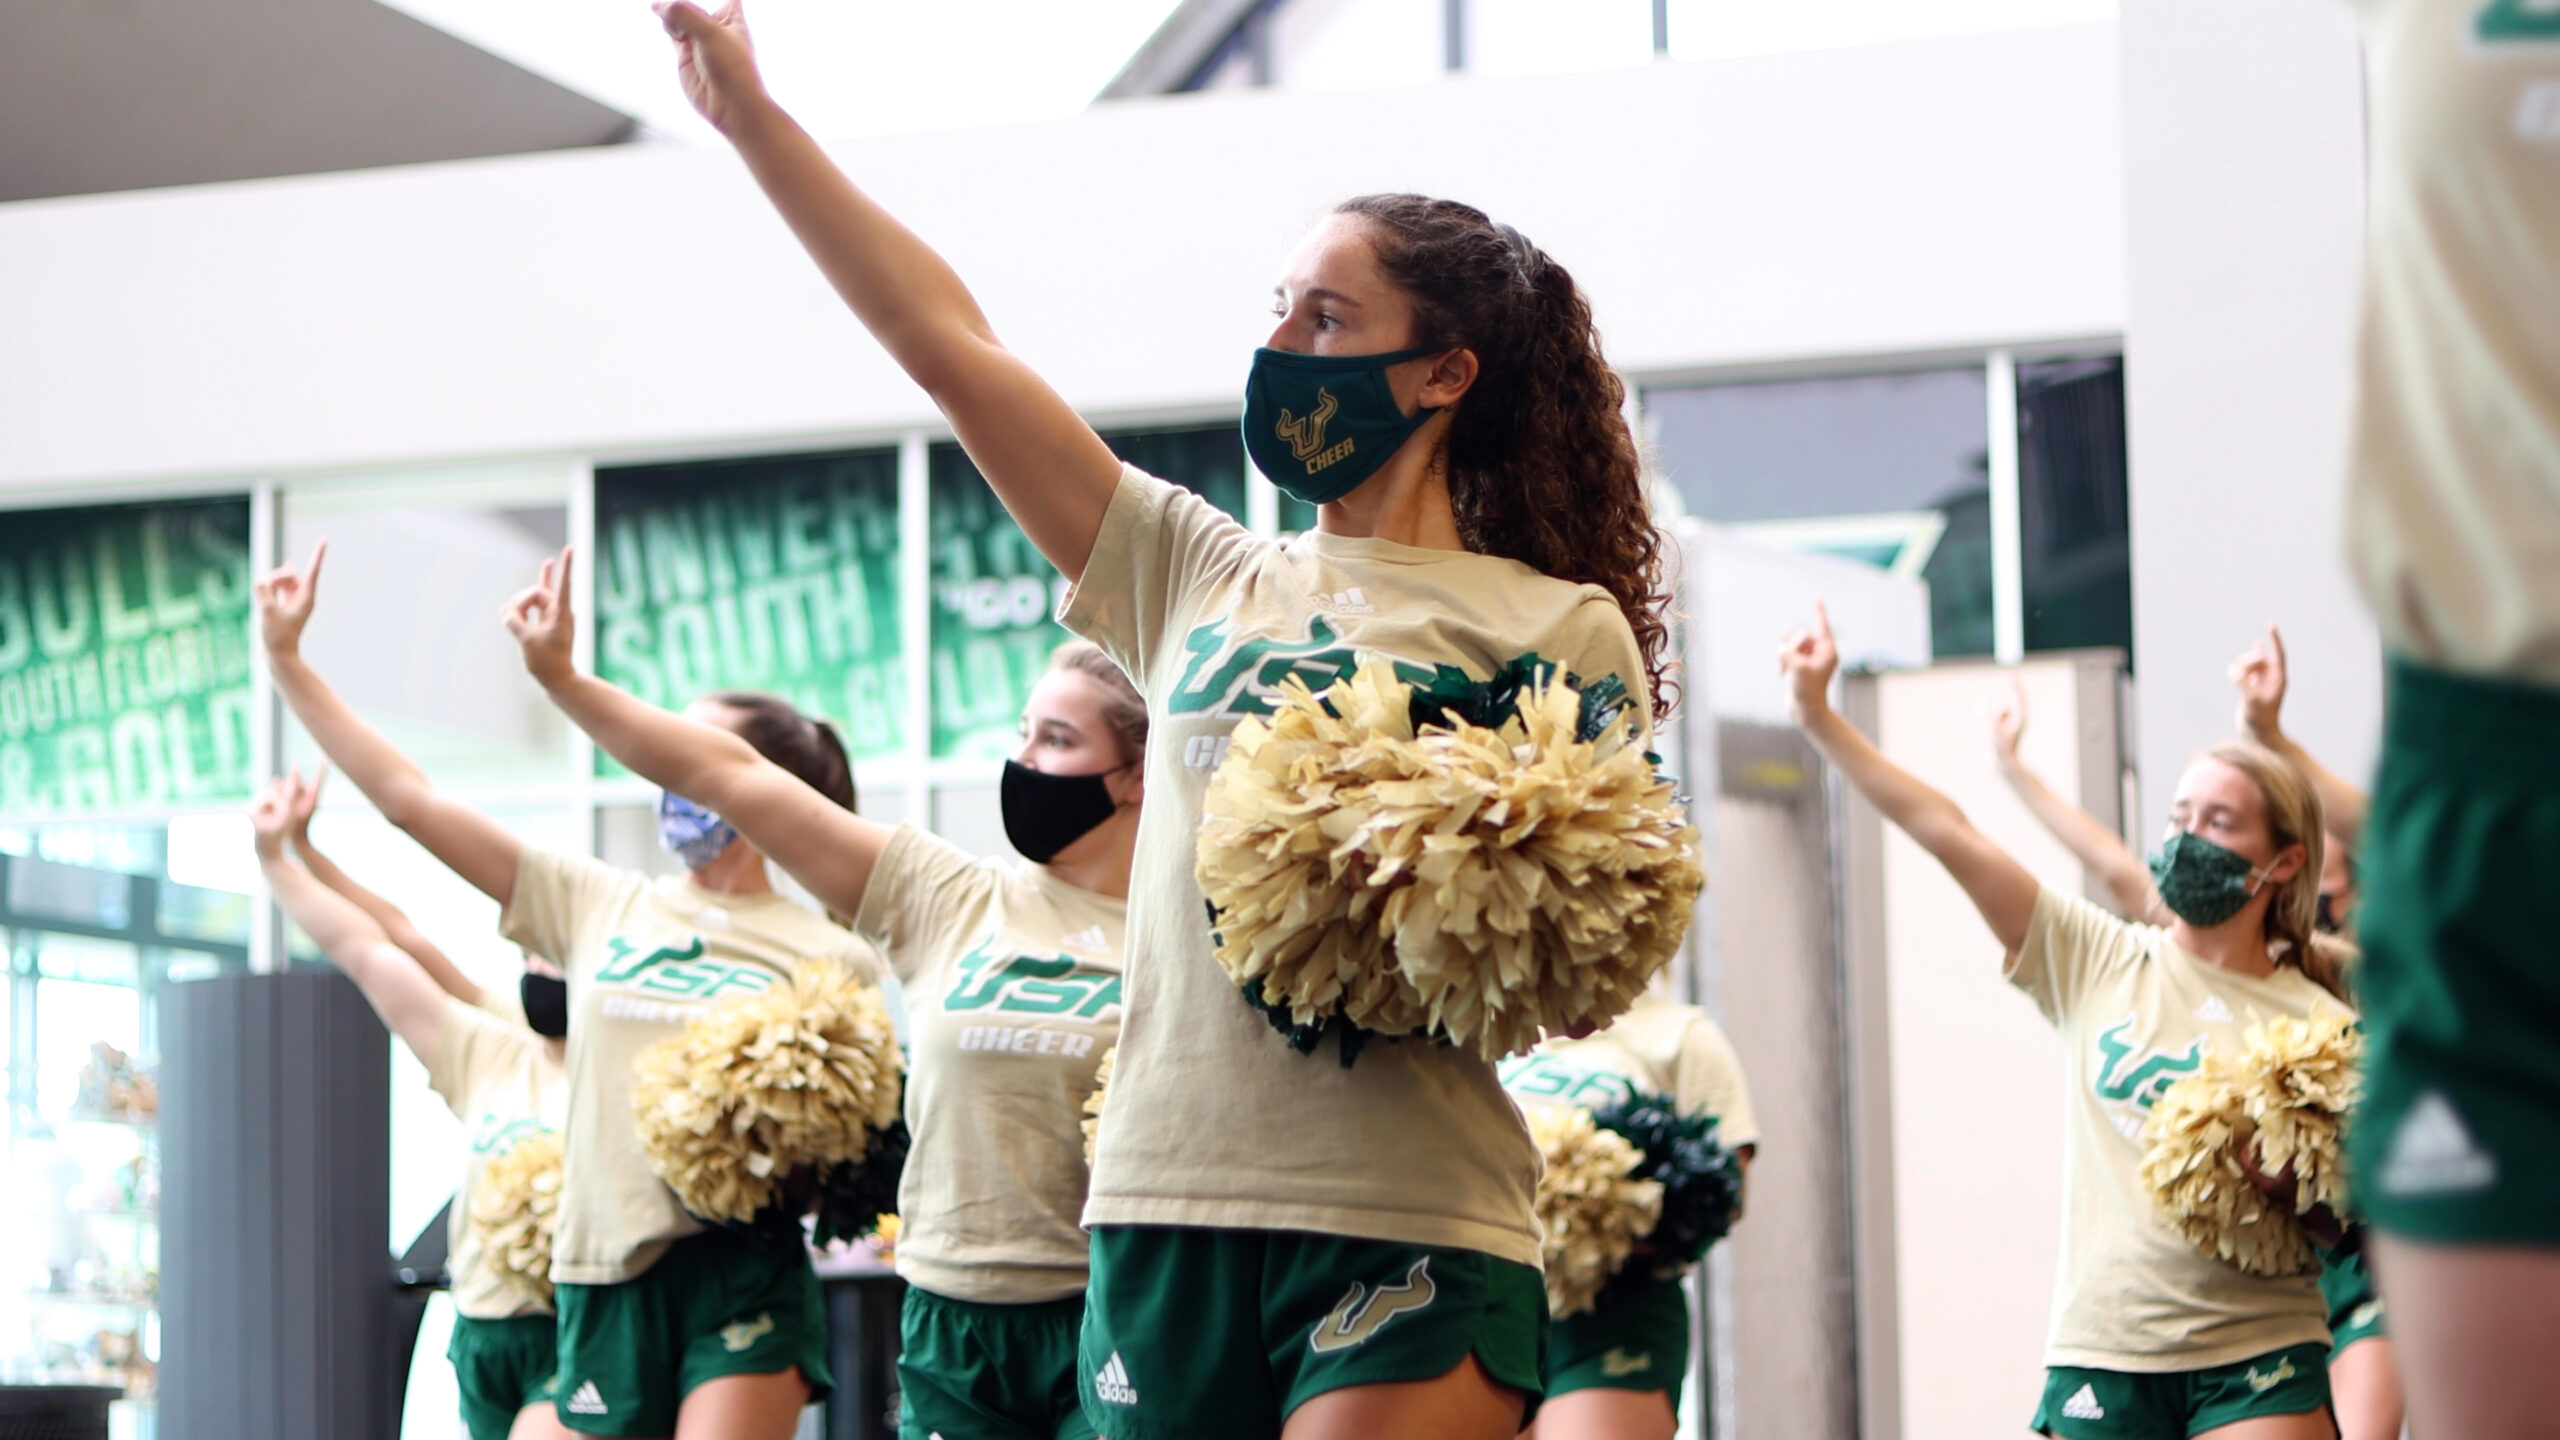 USF all-girl cheerleading team finds new perspective